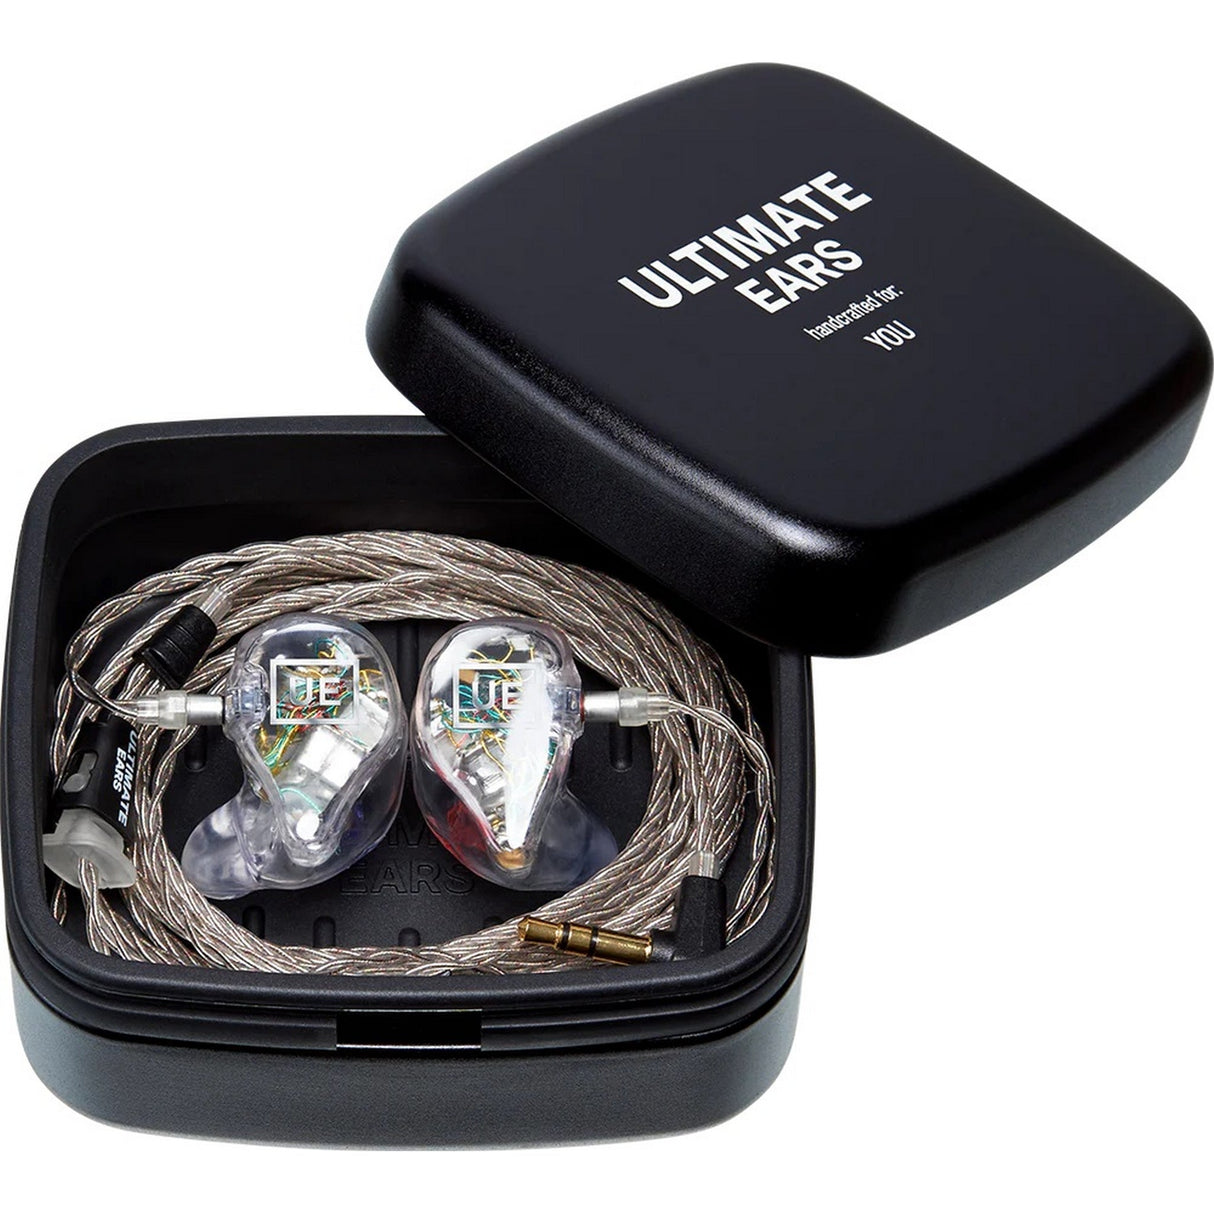 Ultimate Ears Engraved In-Ear Headphones Carrying Case Square